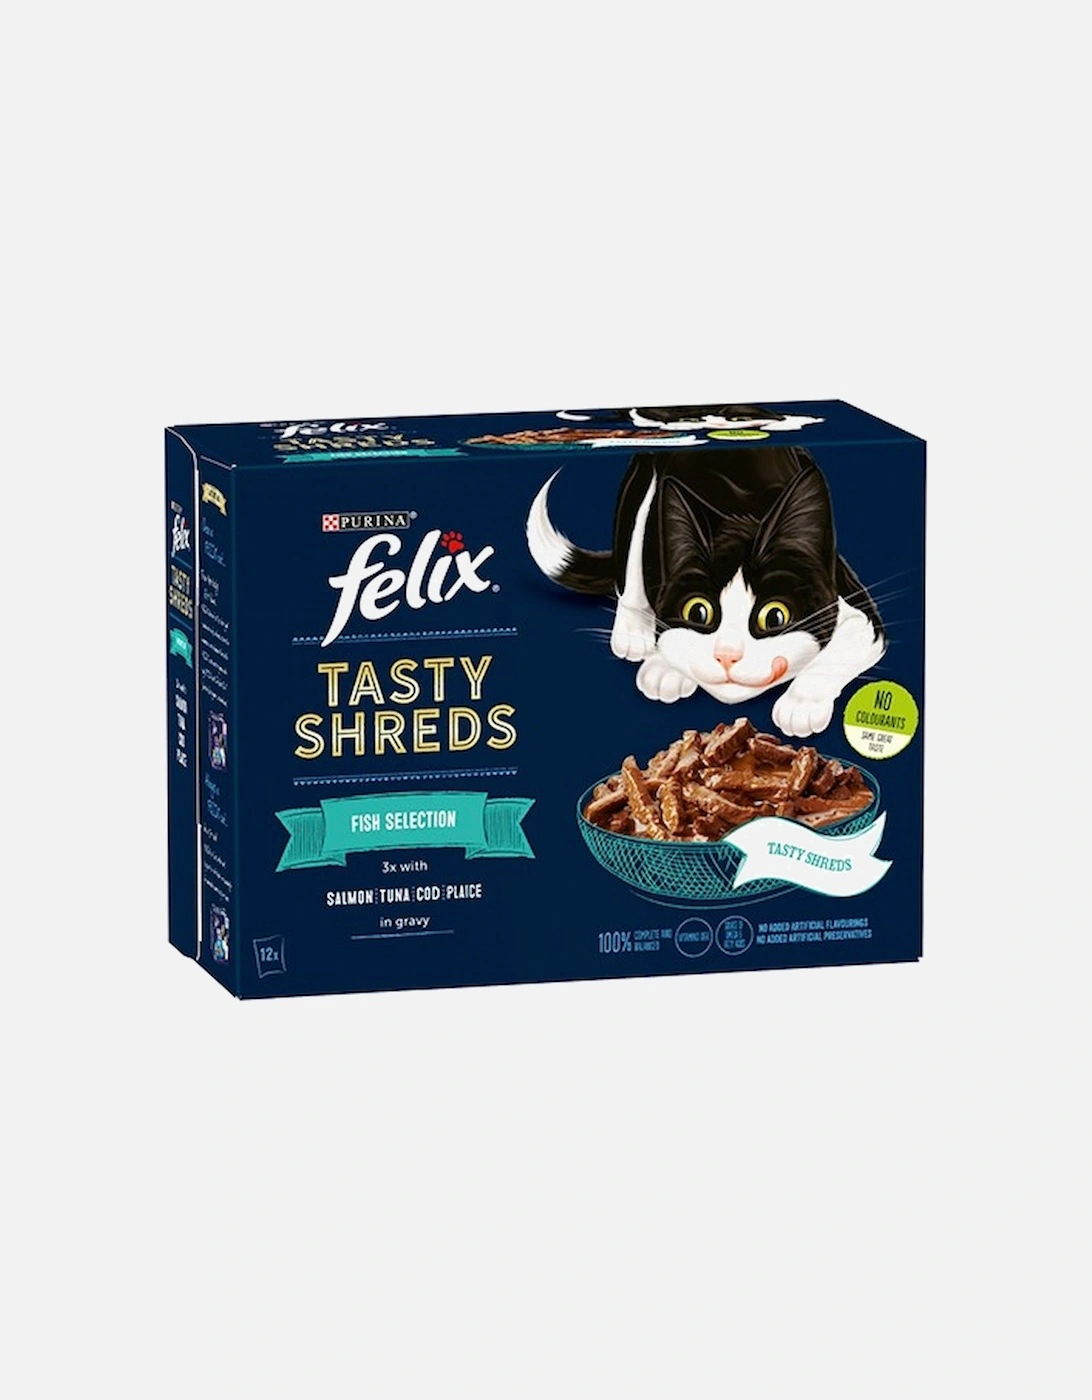 Felix Tasty Shreds Fish Selection In Gravy 12 x 80g Pouches, 5 of 4